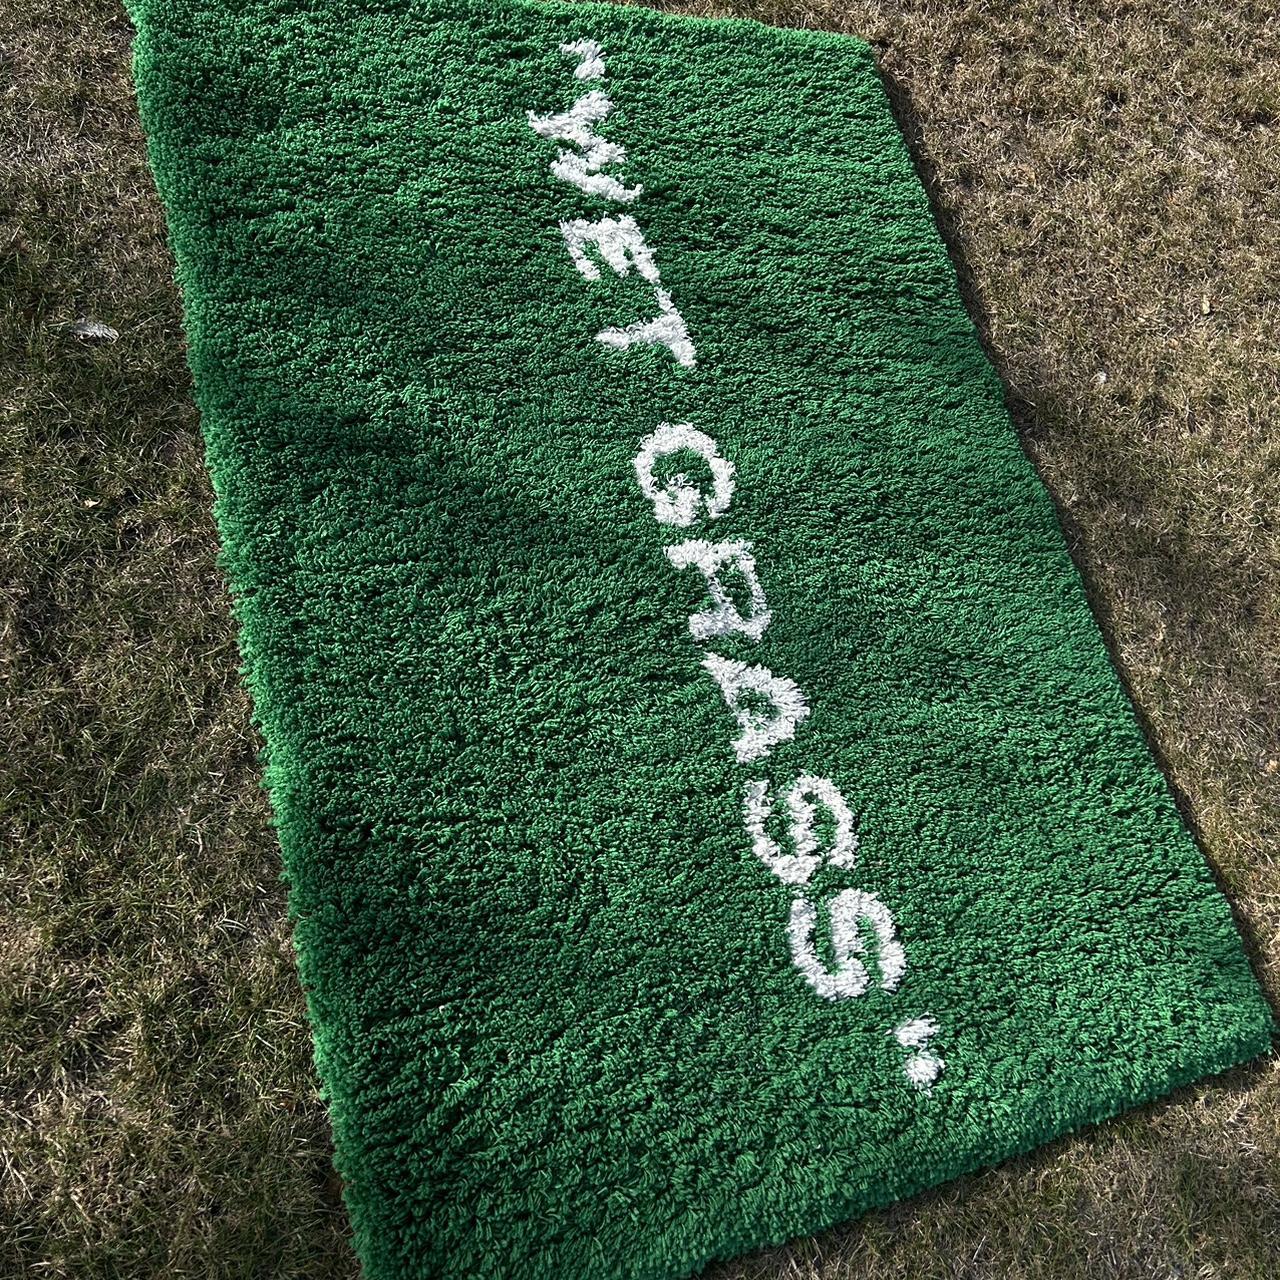 IKEA X VIRGIL ABLOH OFF WHITE “WET GRASS” RUG for Sale in